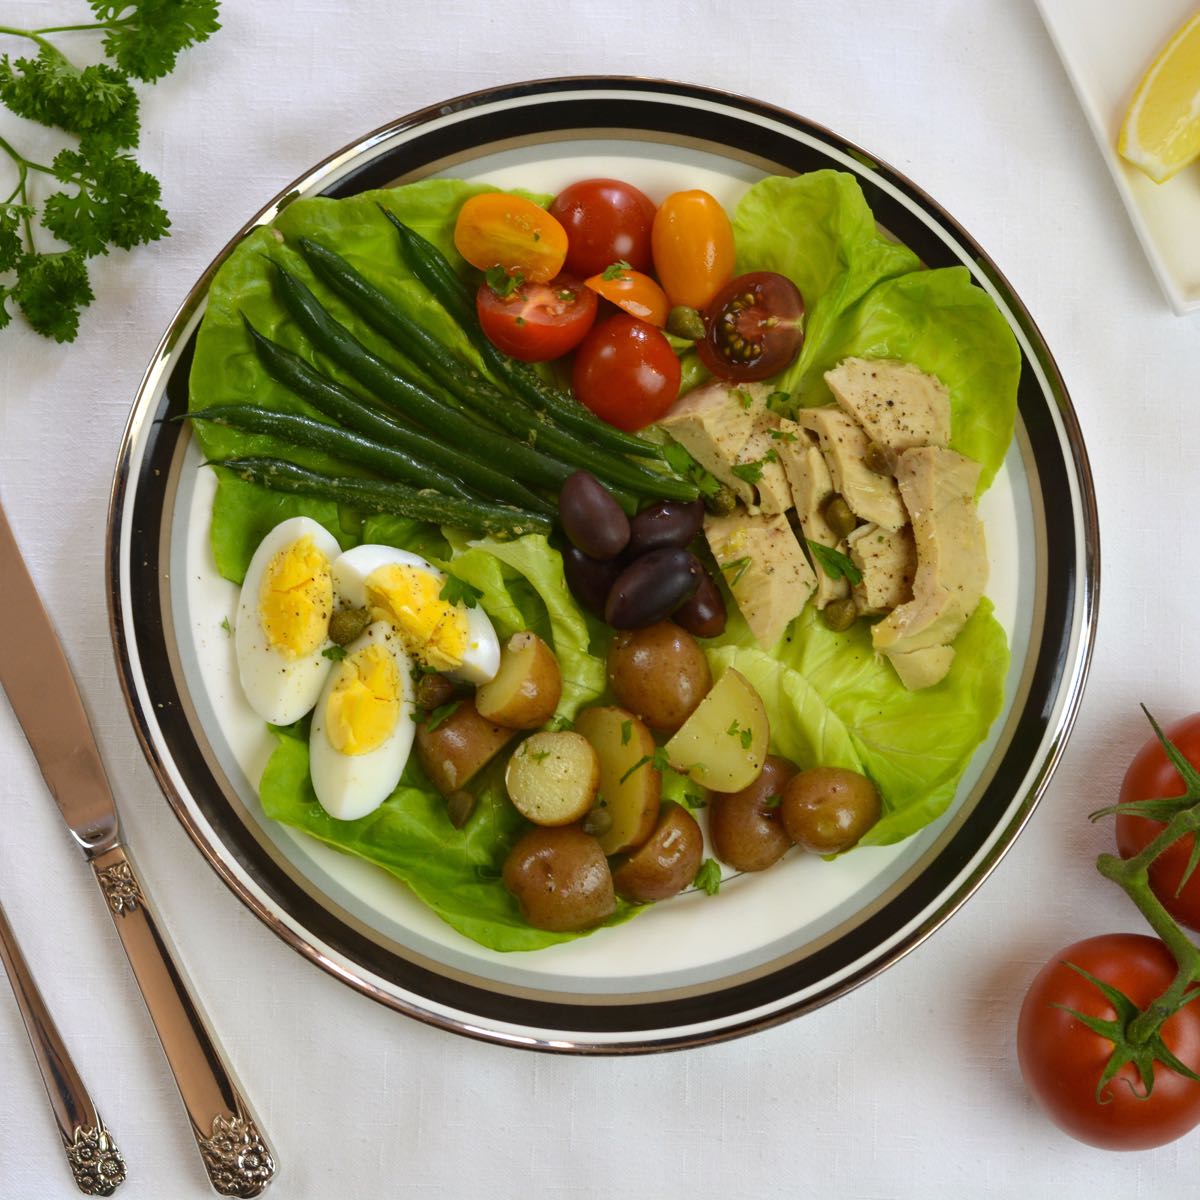 A composed Salad Nicoise: hard boiled egg, potatoes, green beans, tomatoes and canned tuna with an amazingly delicious vinaigrette dressing.